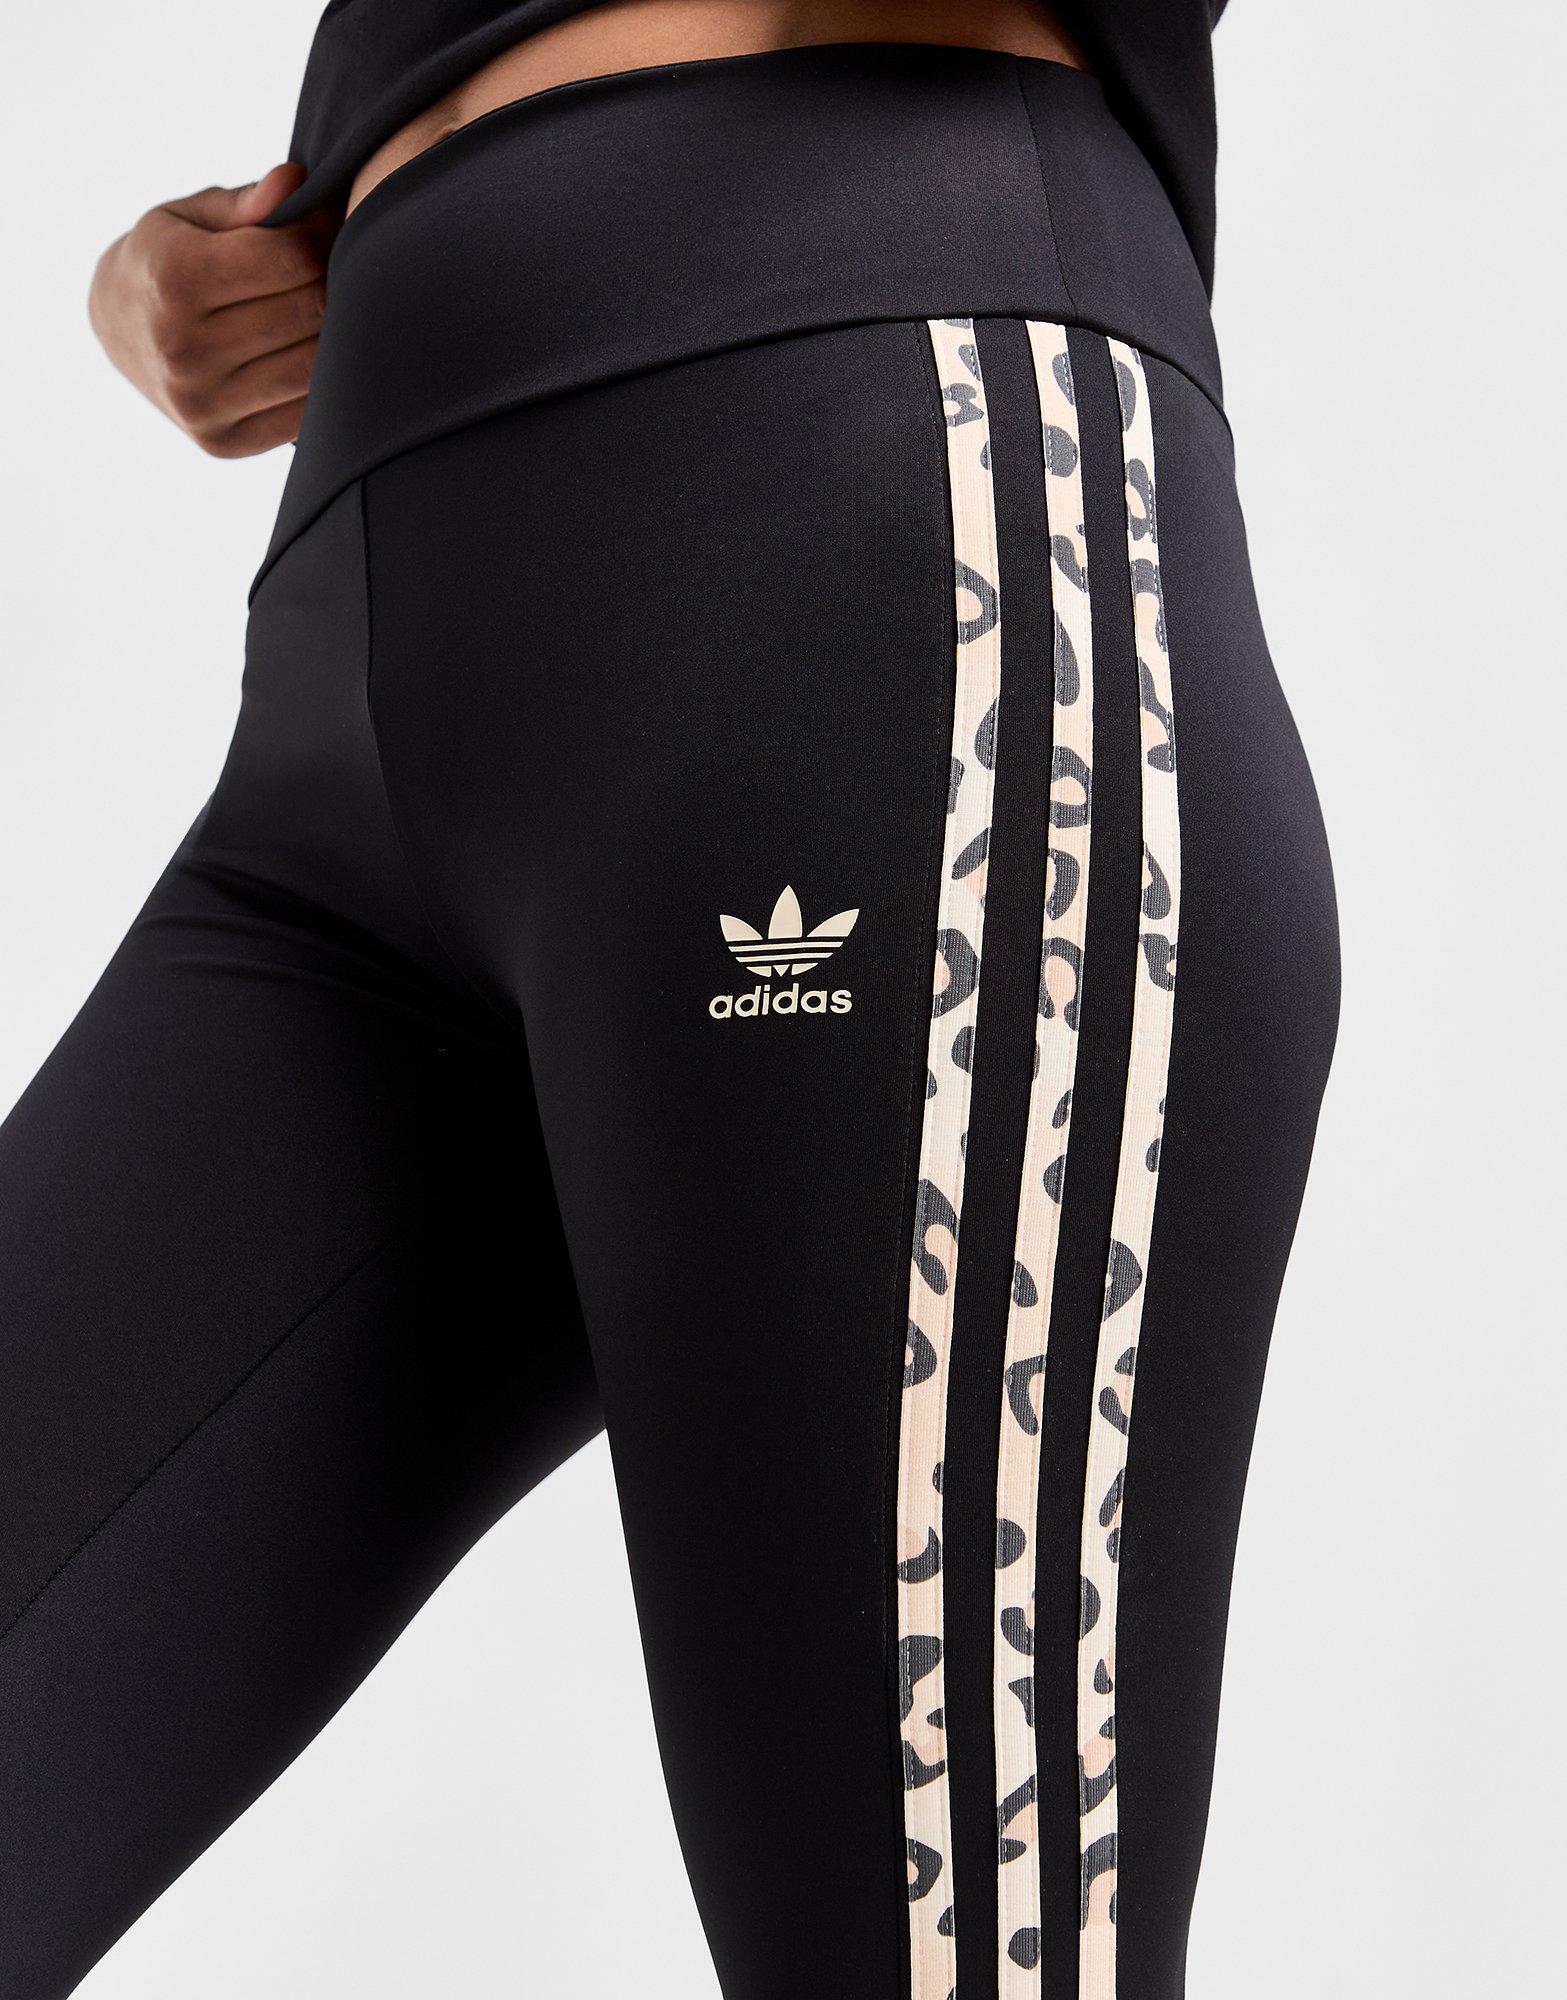 adidas Originals Leopard Luxe flared leggings in black and red leopard  three stripe